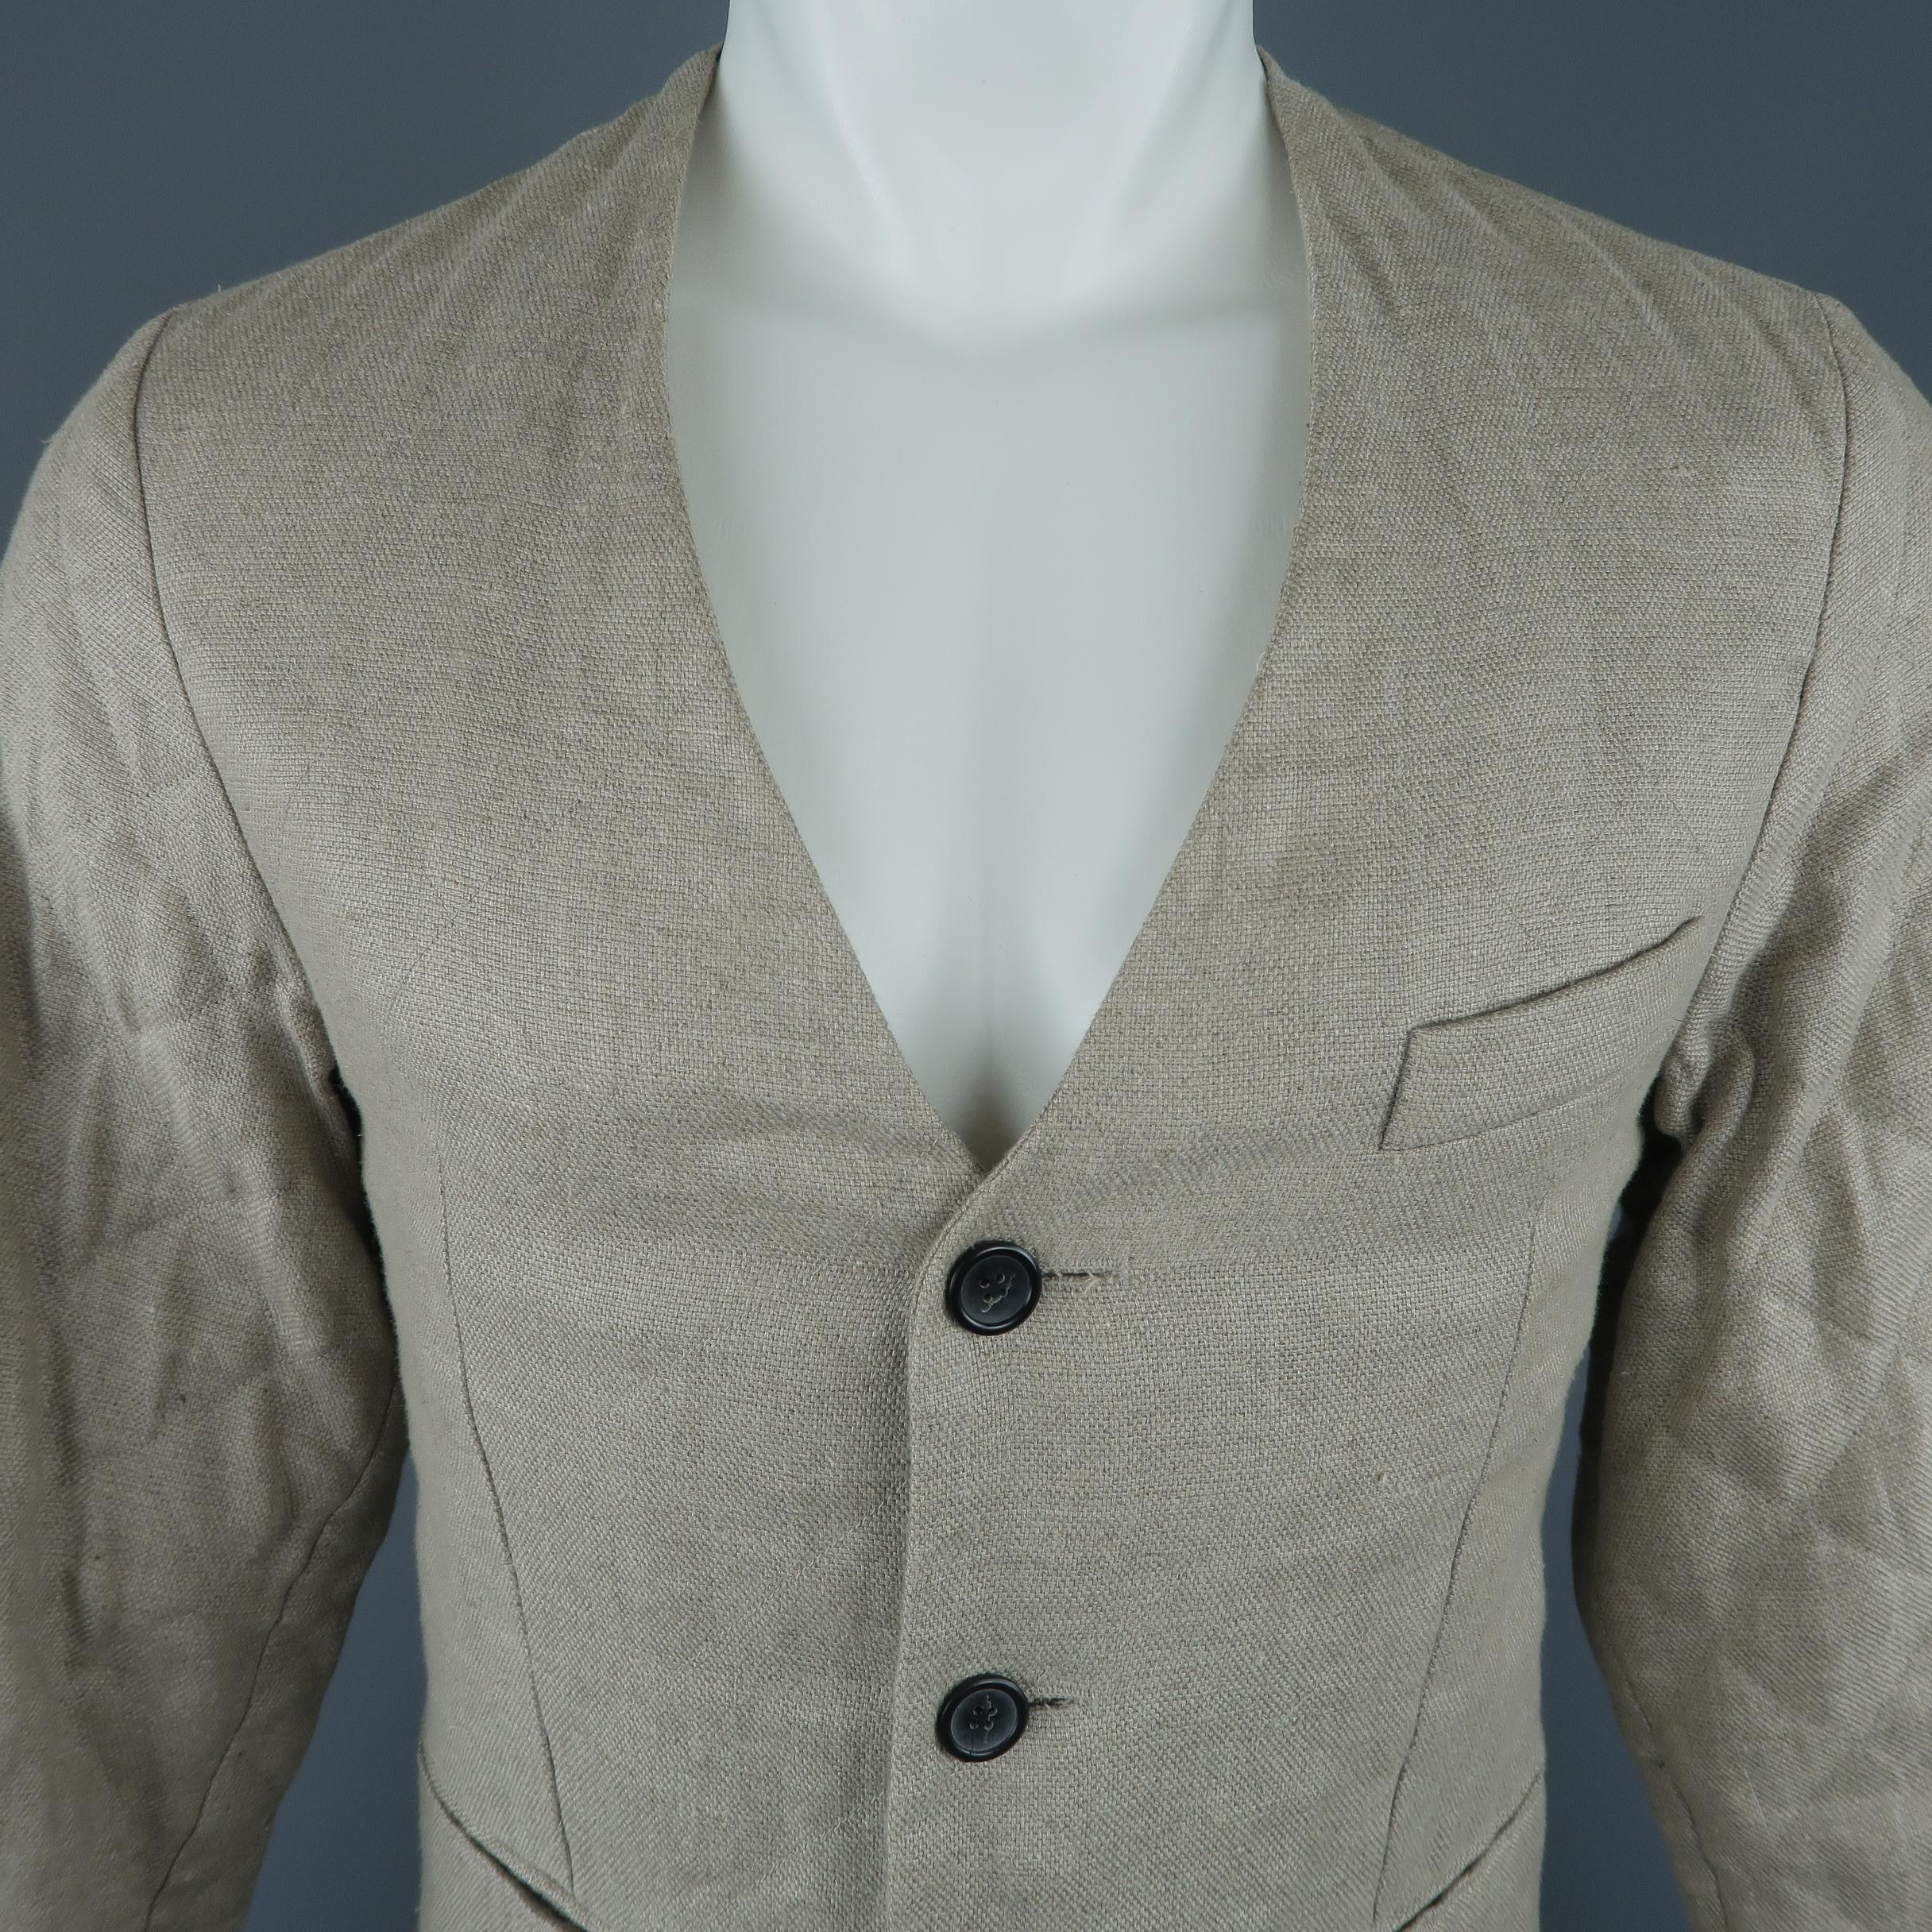 RAF SIMONS Spring Summer 2009 Collection sport coat jacket comes in a khaki beige quilted linen material with a collarless V neck, three button front, and simulated slit pockets. Altered to fit a slim silhouette and minor wear. As-is.
 
Good